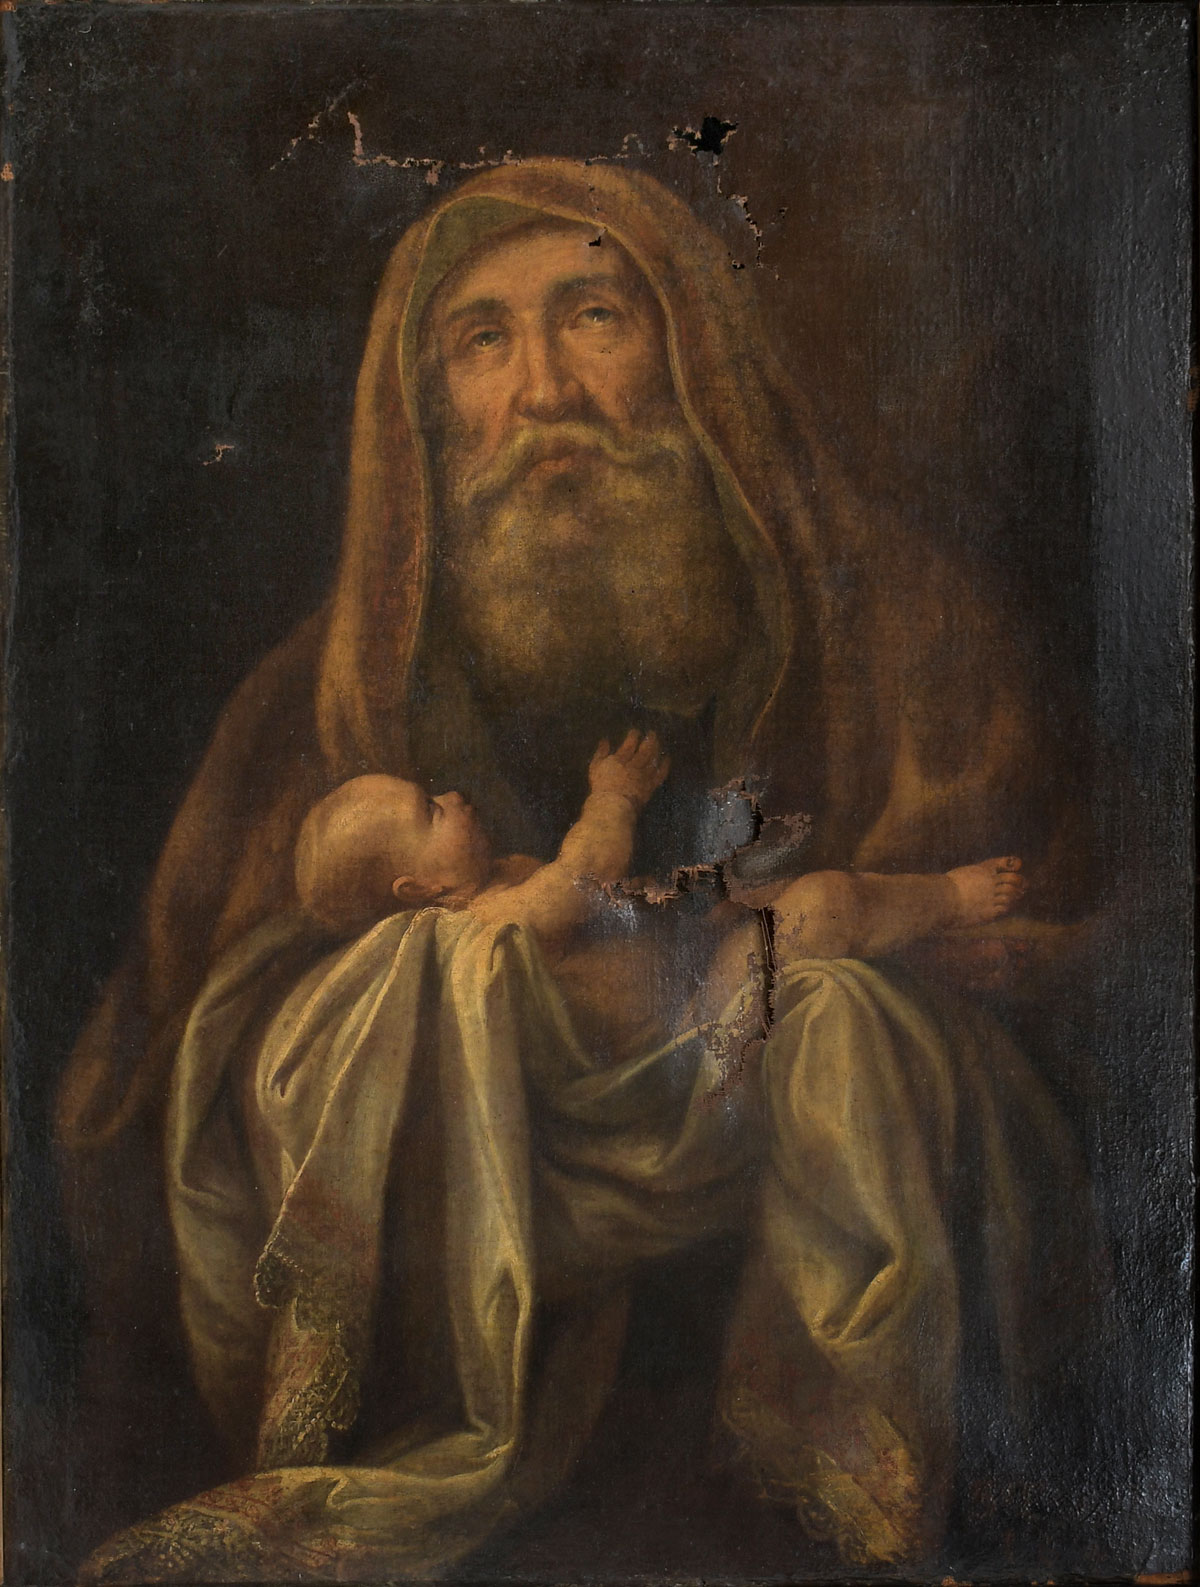 EARLY PAINTING SIMEON HOLDING BABY